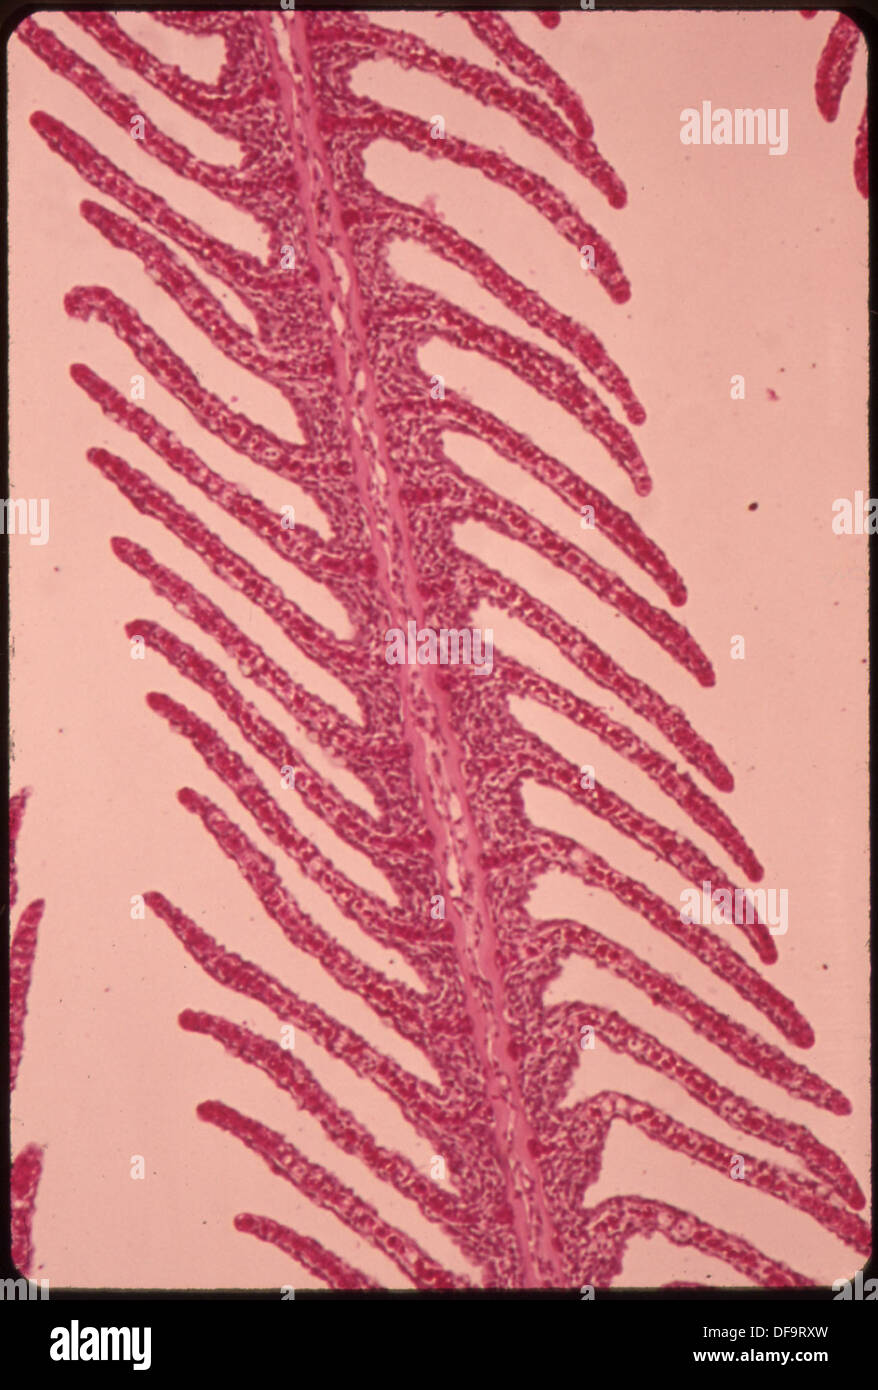 THE EPITHELIUM (GILL COVERING) OF A HEALTHY CHANNEL CATFISH CAMERA MICROSCOPE STUDY MADE AT THE NATIONAL WATER... 551614 Stock Photo